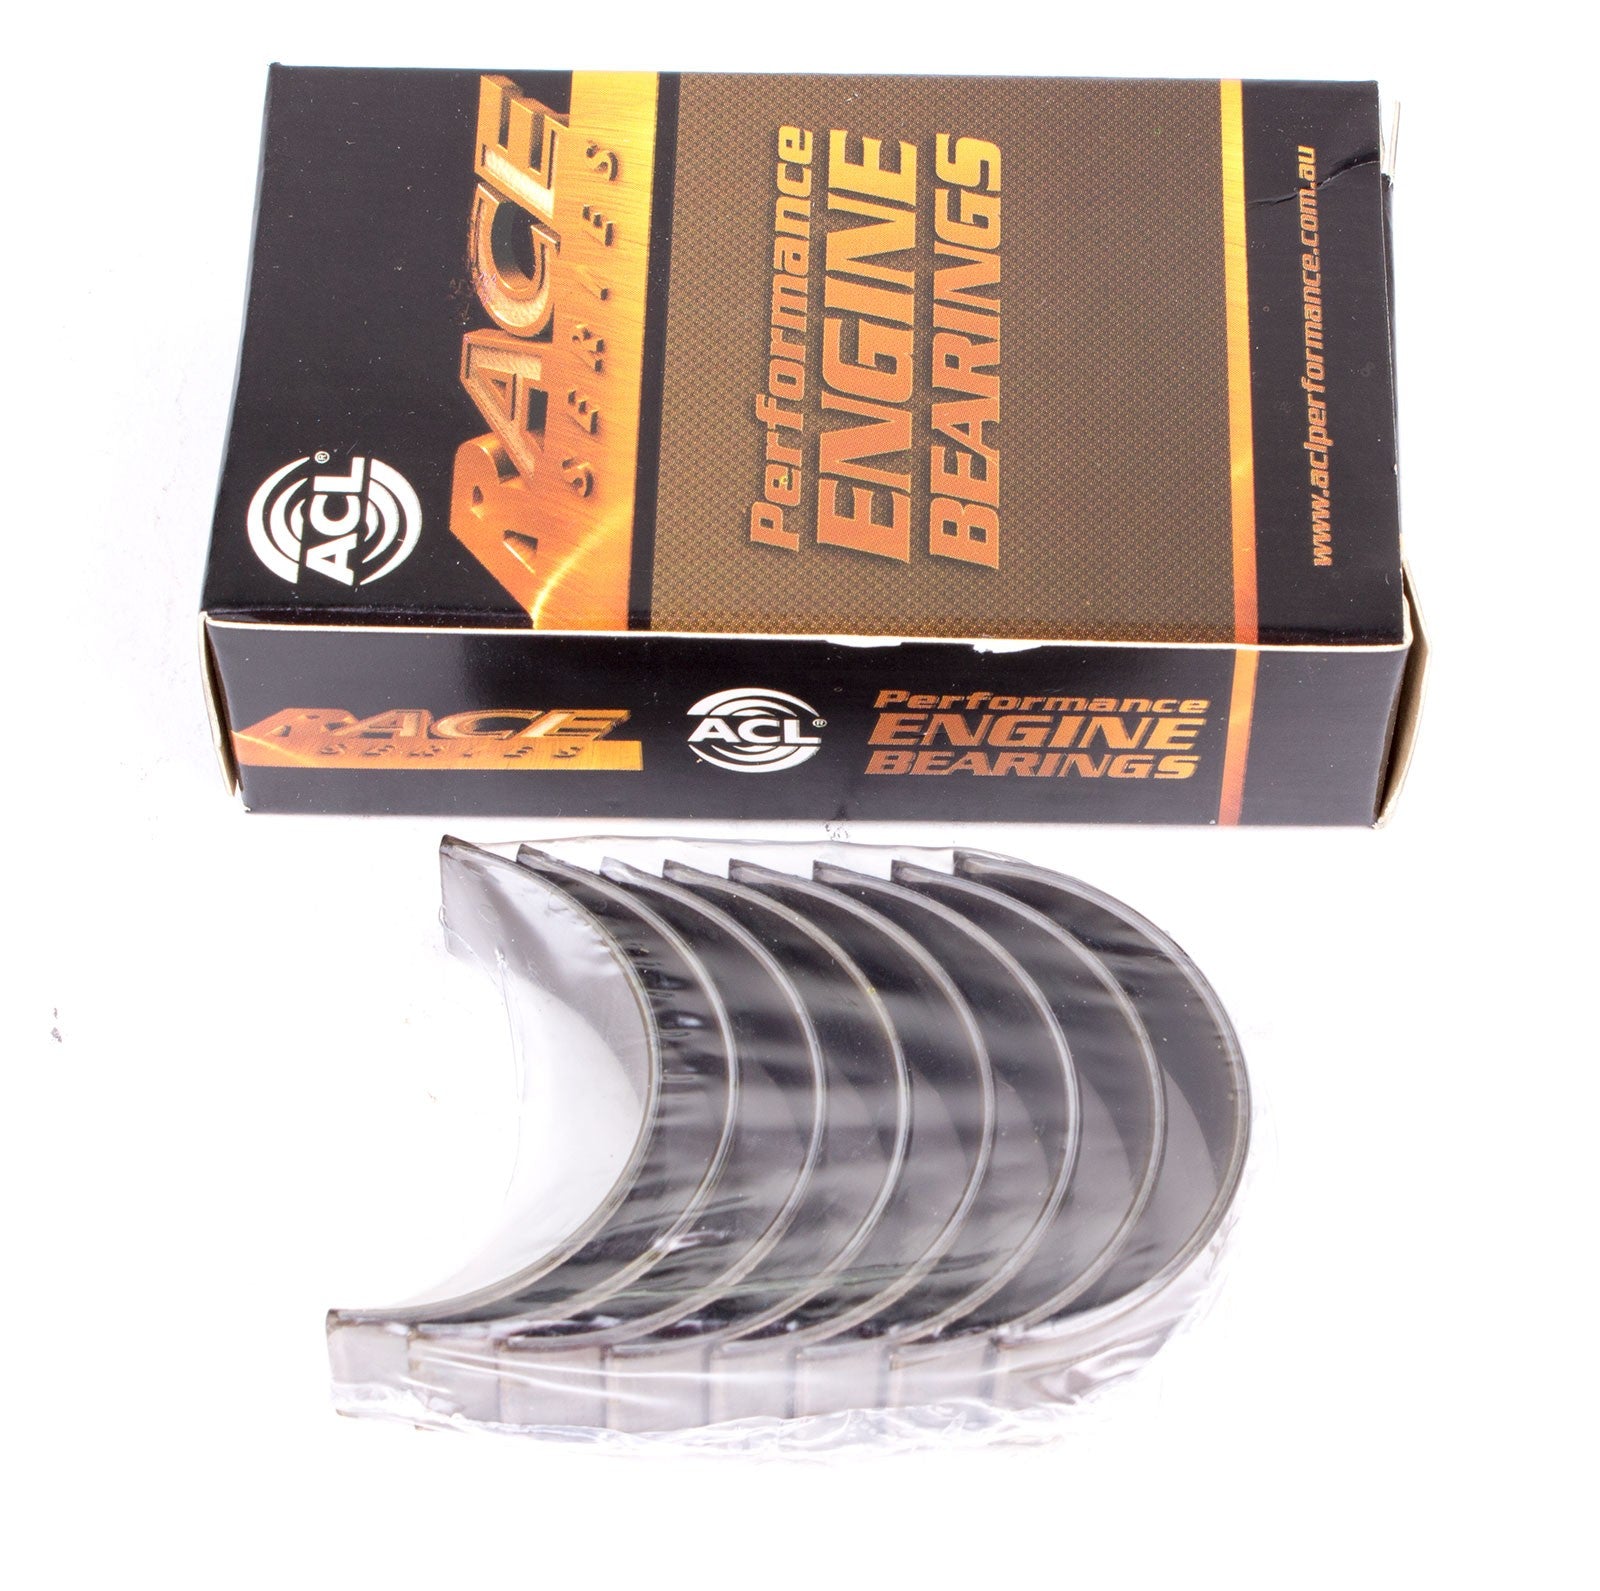 ACL 5M1010H-020 Main bearing set (ACL Race Series) Photo-0 